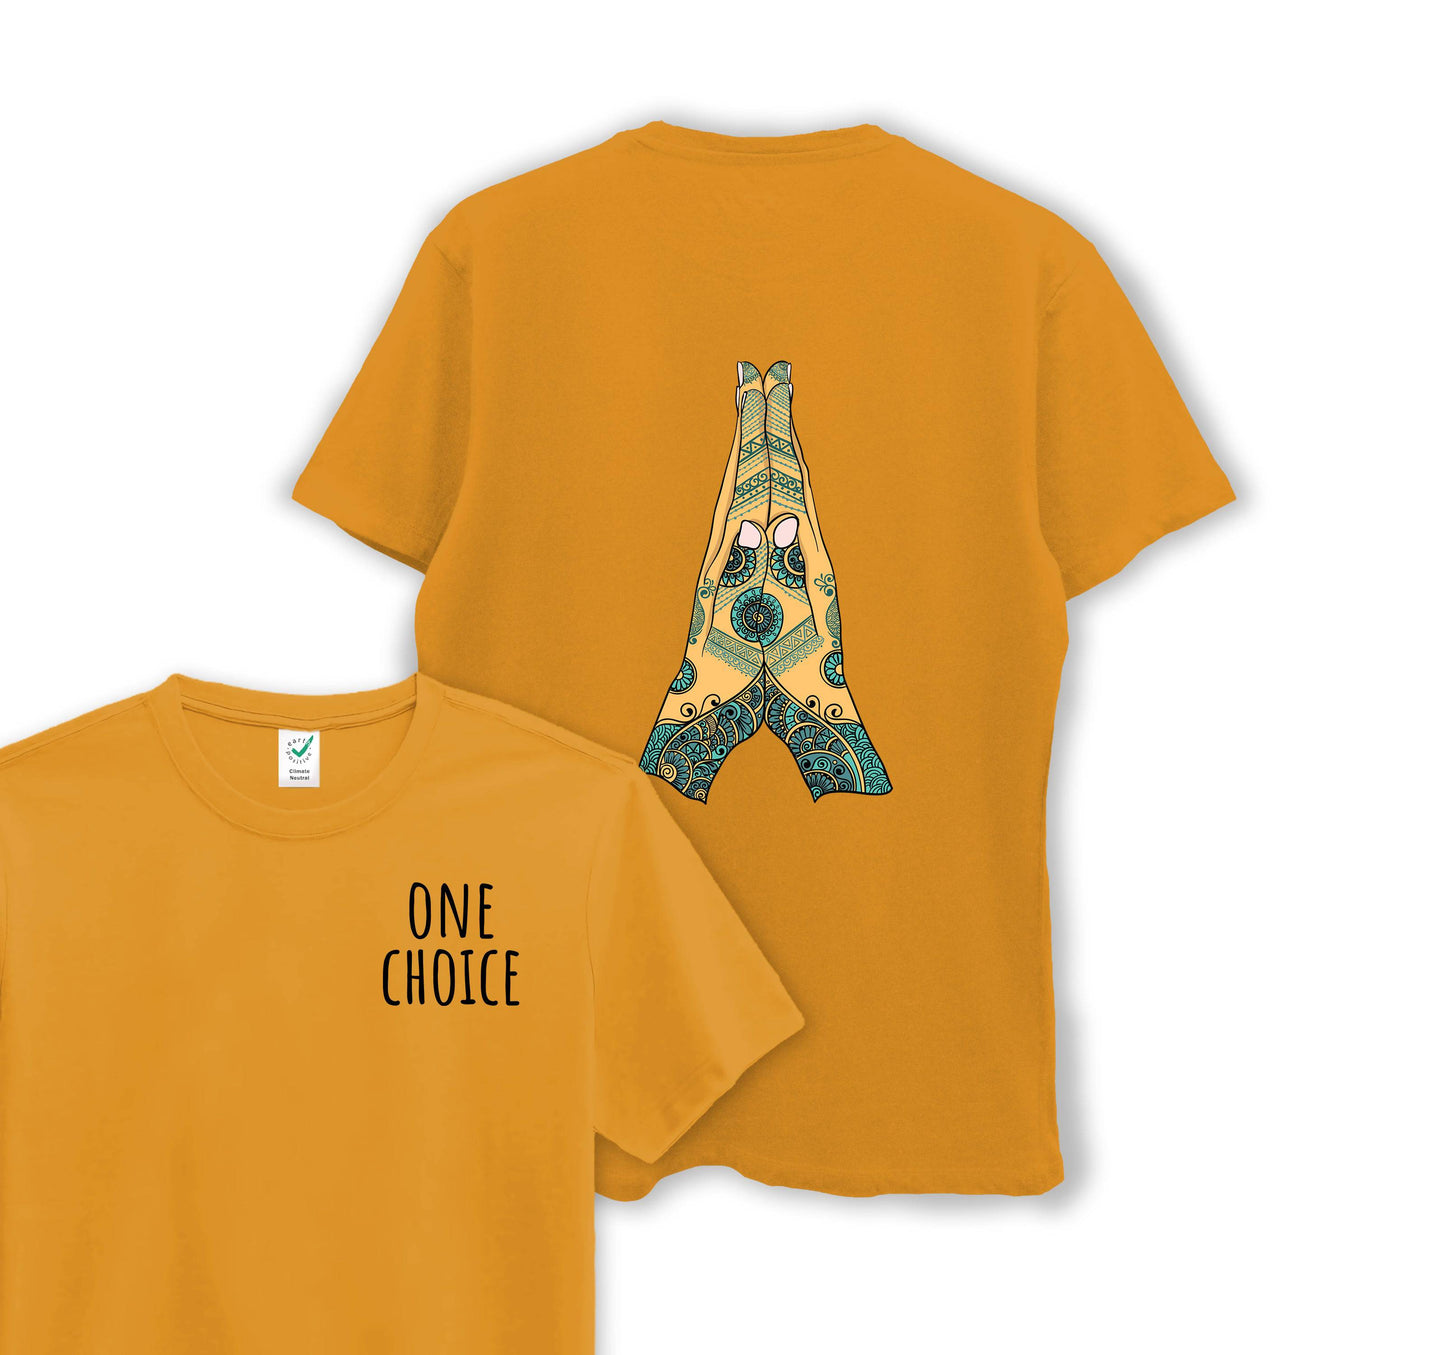 Joined Hands - Organic Cotton Tee - One Choice Apparel